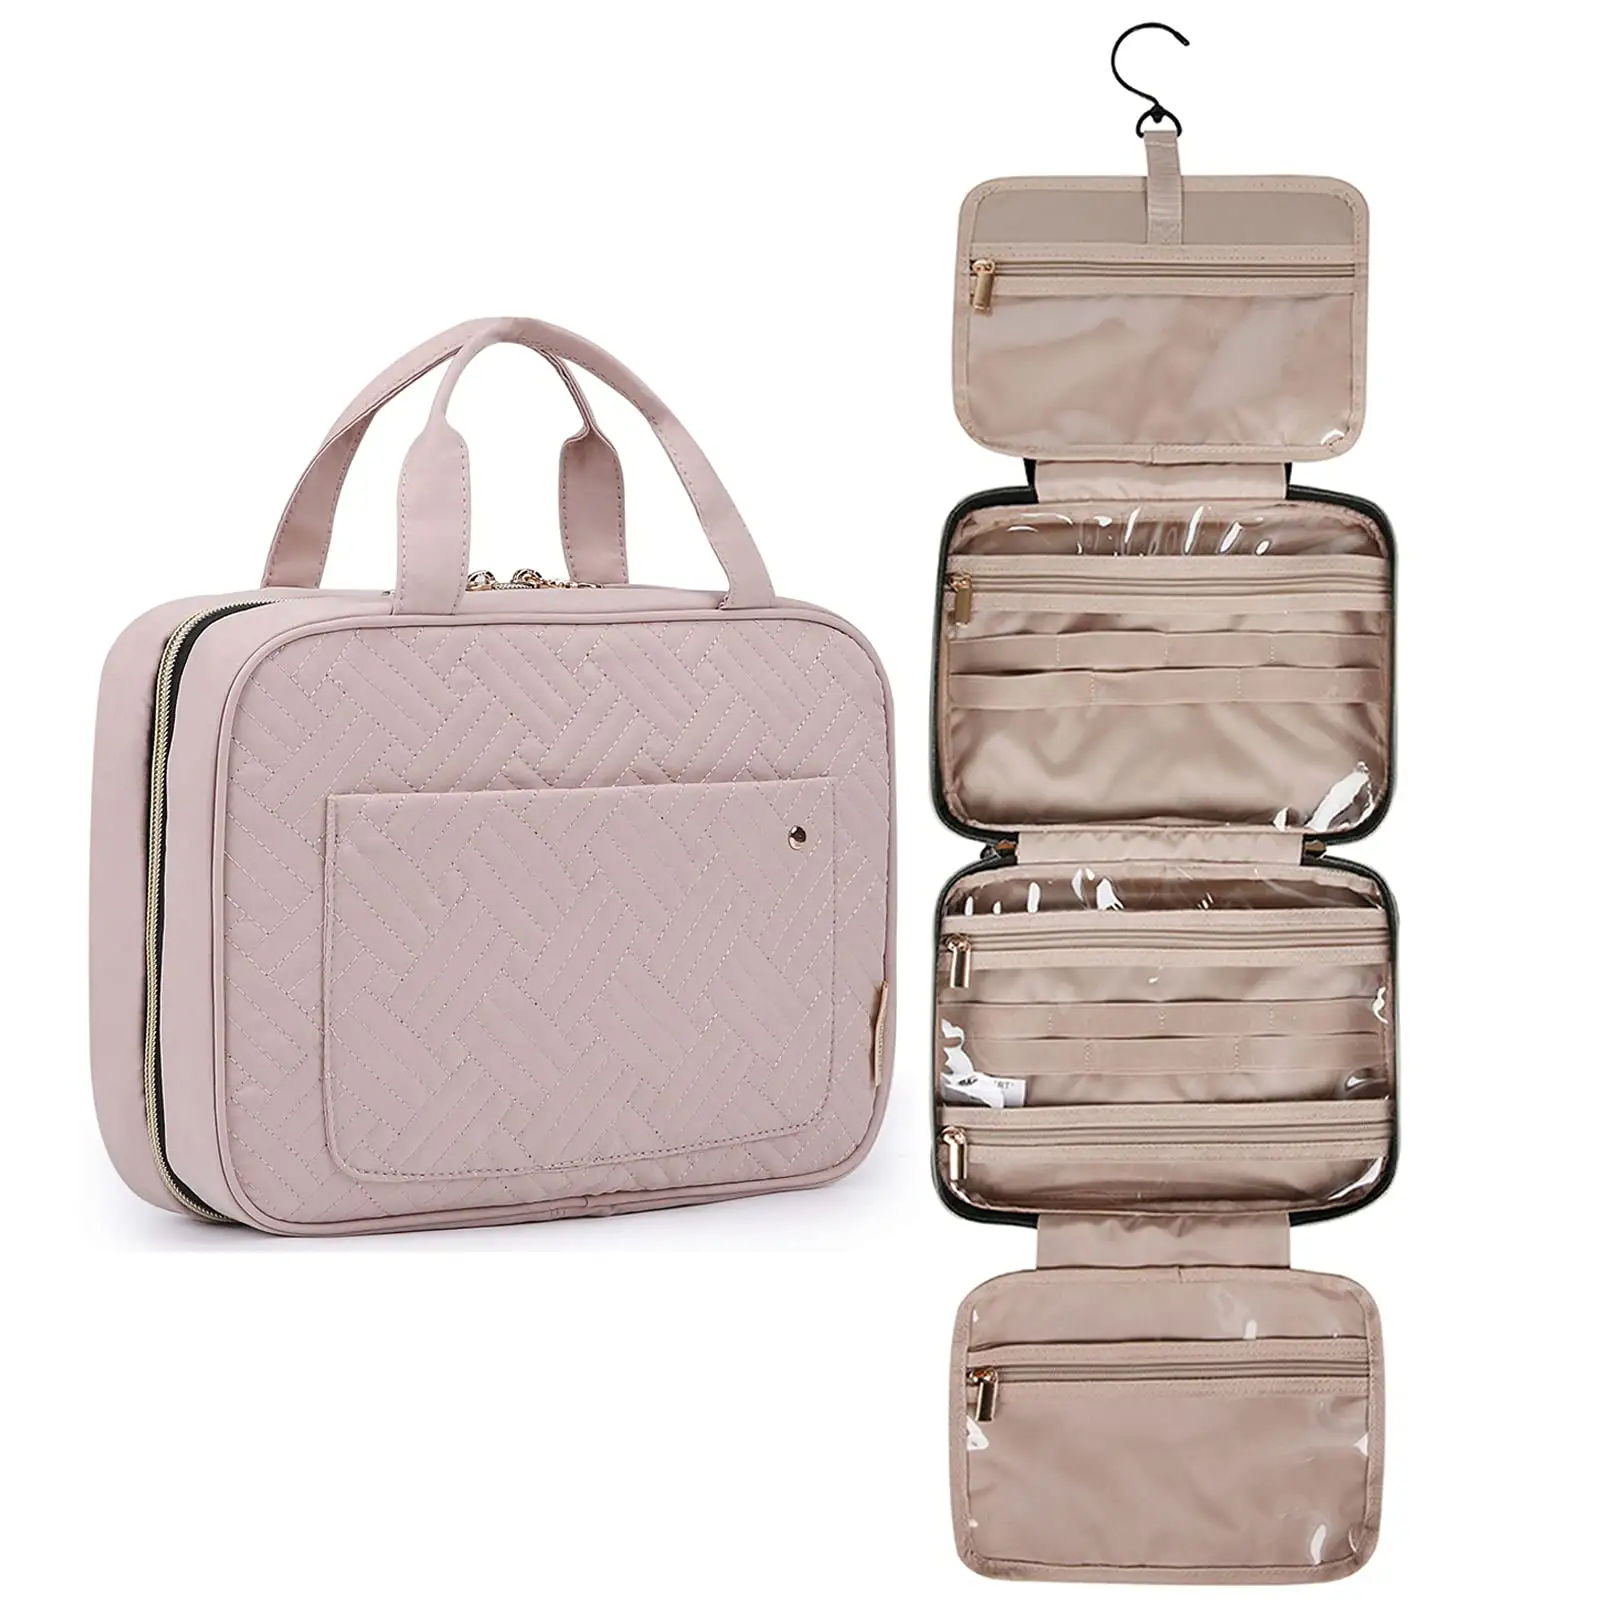 Wholesale Toiletry Bag Travel toiletry Bag with Hanging Hook Waterproof Makeup Cosmetic Bag Travel Organizer for Accessories